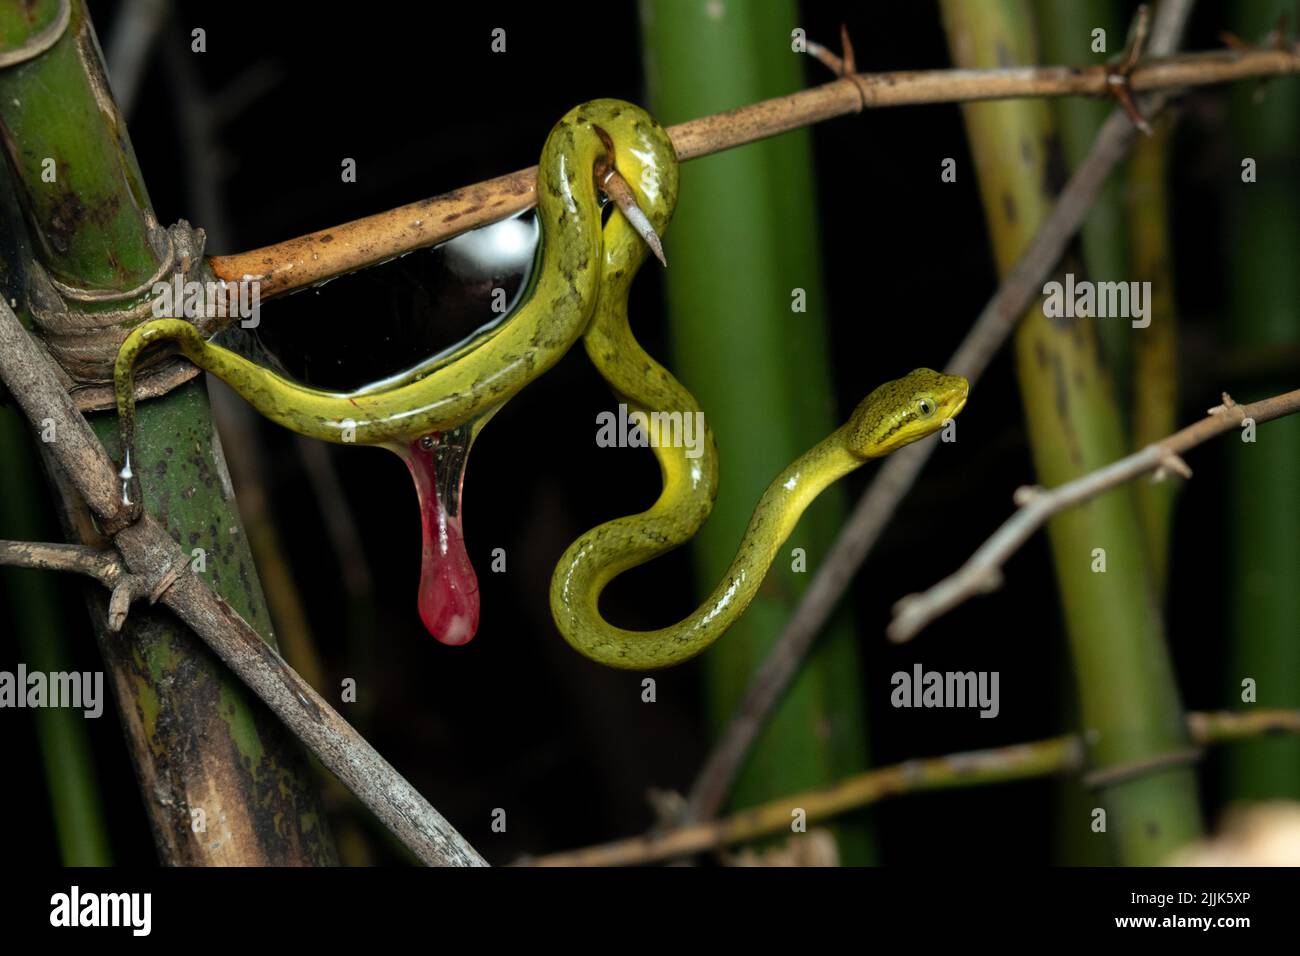 The birthing fluid drips of a newborn snake. Valsad, India: THESE INCREDIBLE images capture a rare site of a snake giving birth, multiple tails extend Stock Photo